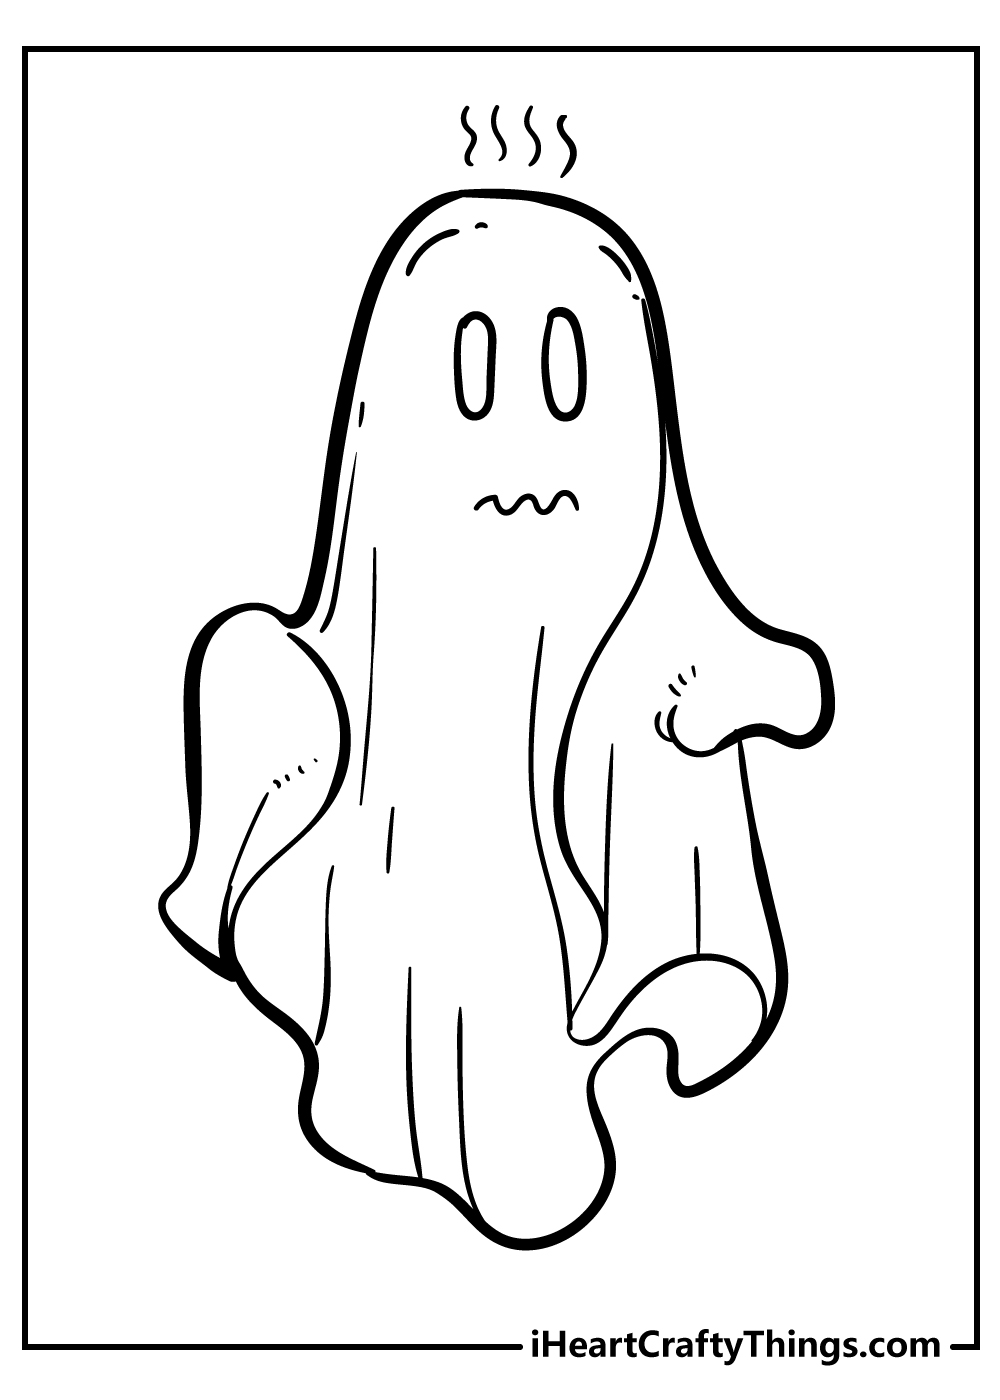 Ghost Coloring Sheet for children free download